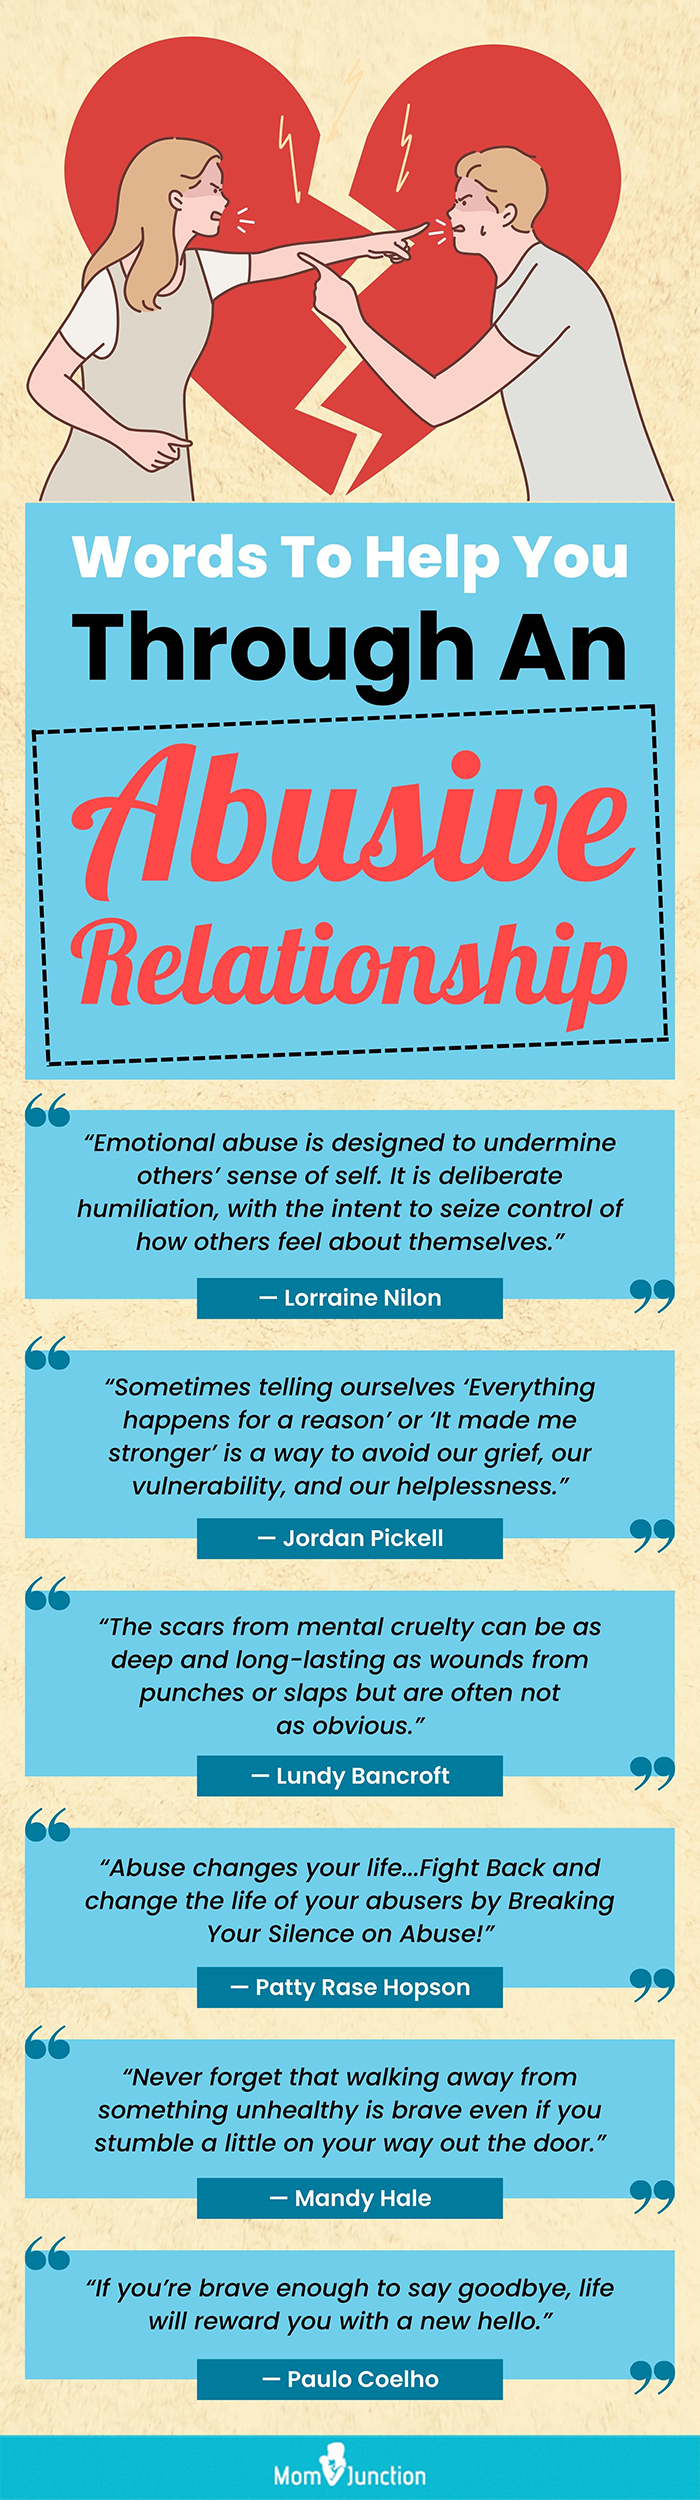 75 Abusive Relationship Quotes and Sayings To Move On pic